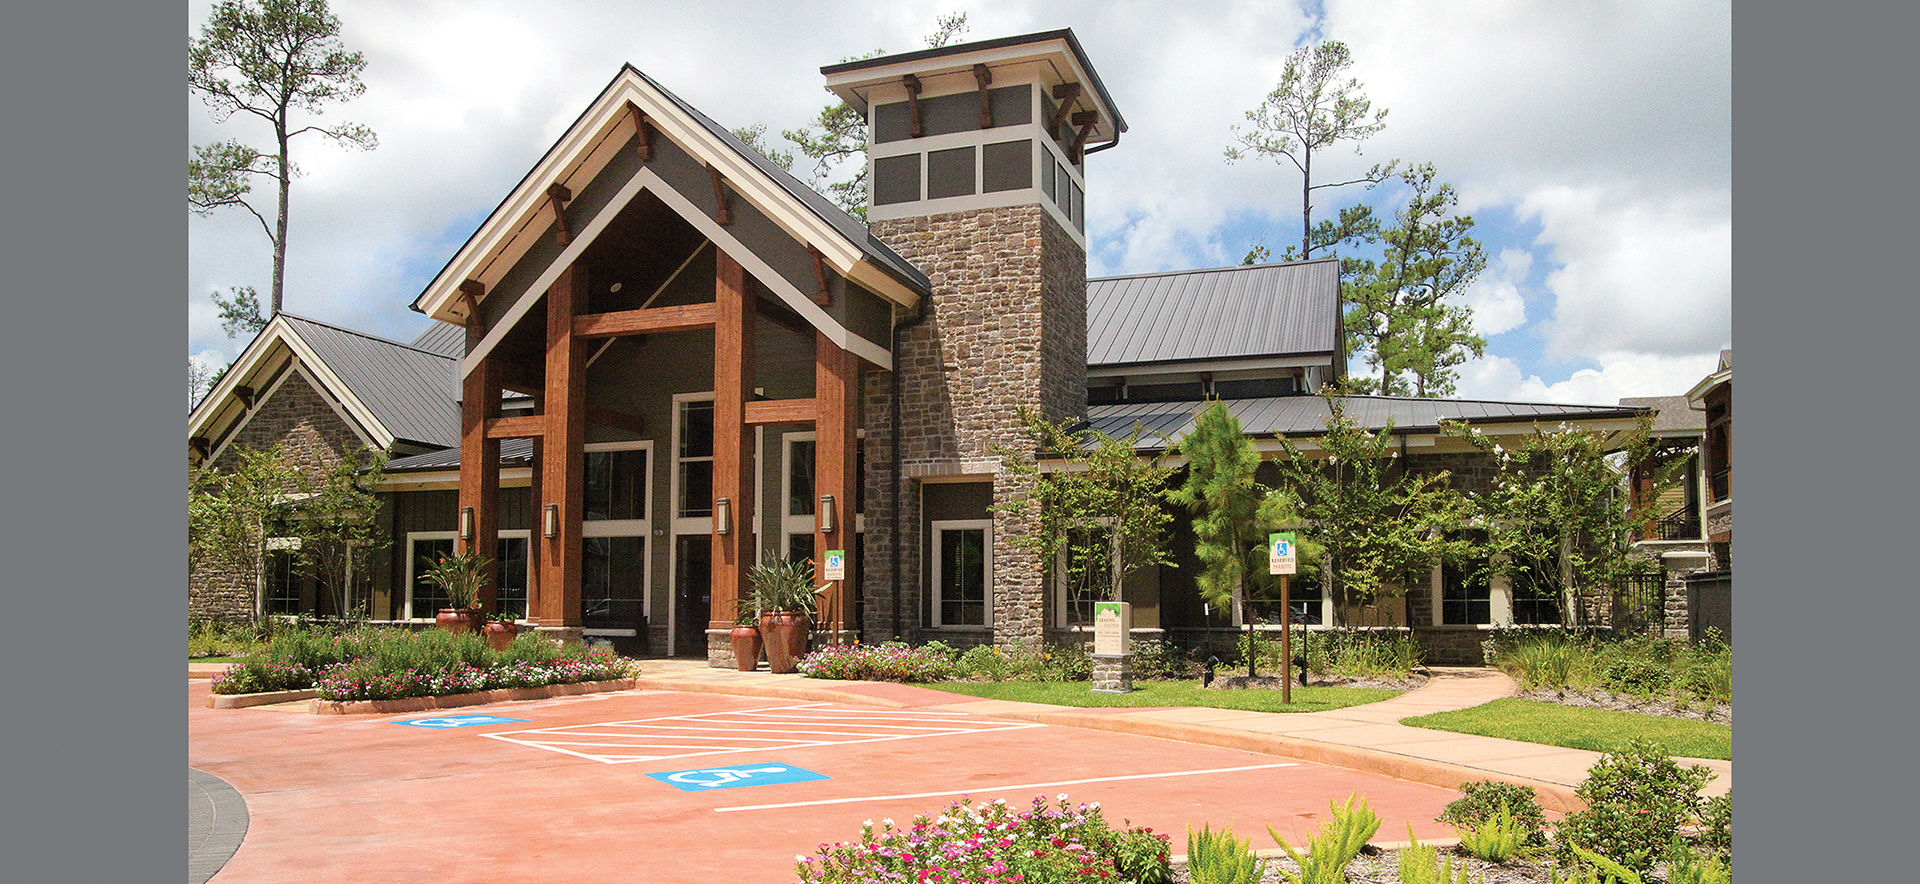 The Woodlands Lodge